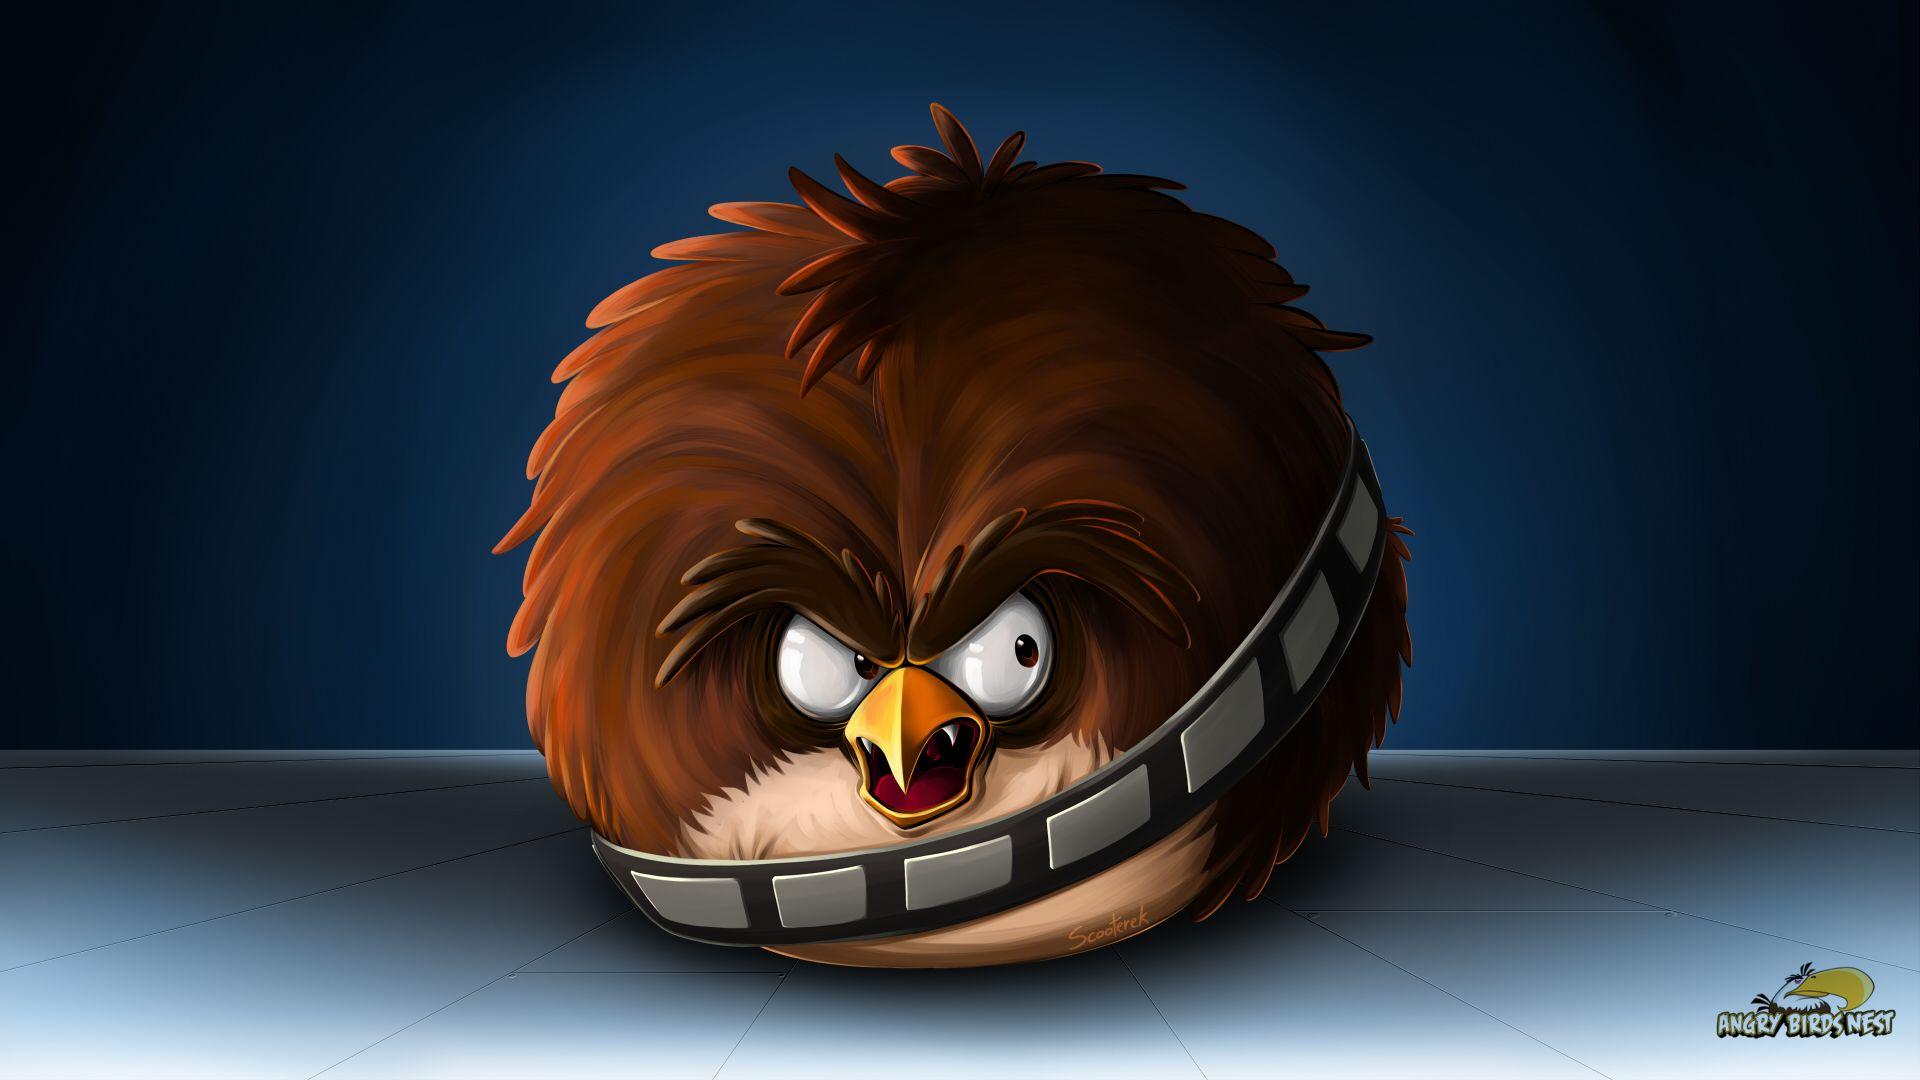 Angry Birds Are you angry? HD Wallpaper Angry Birds Wallpaper 1920